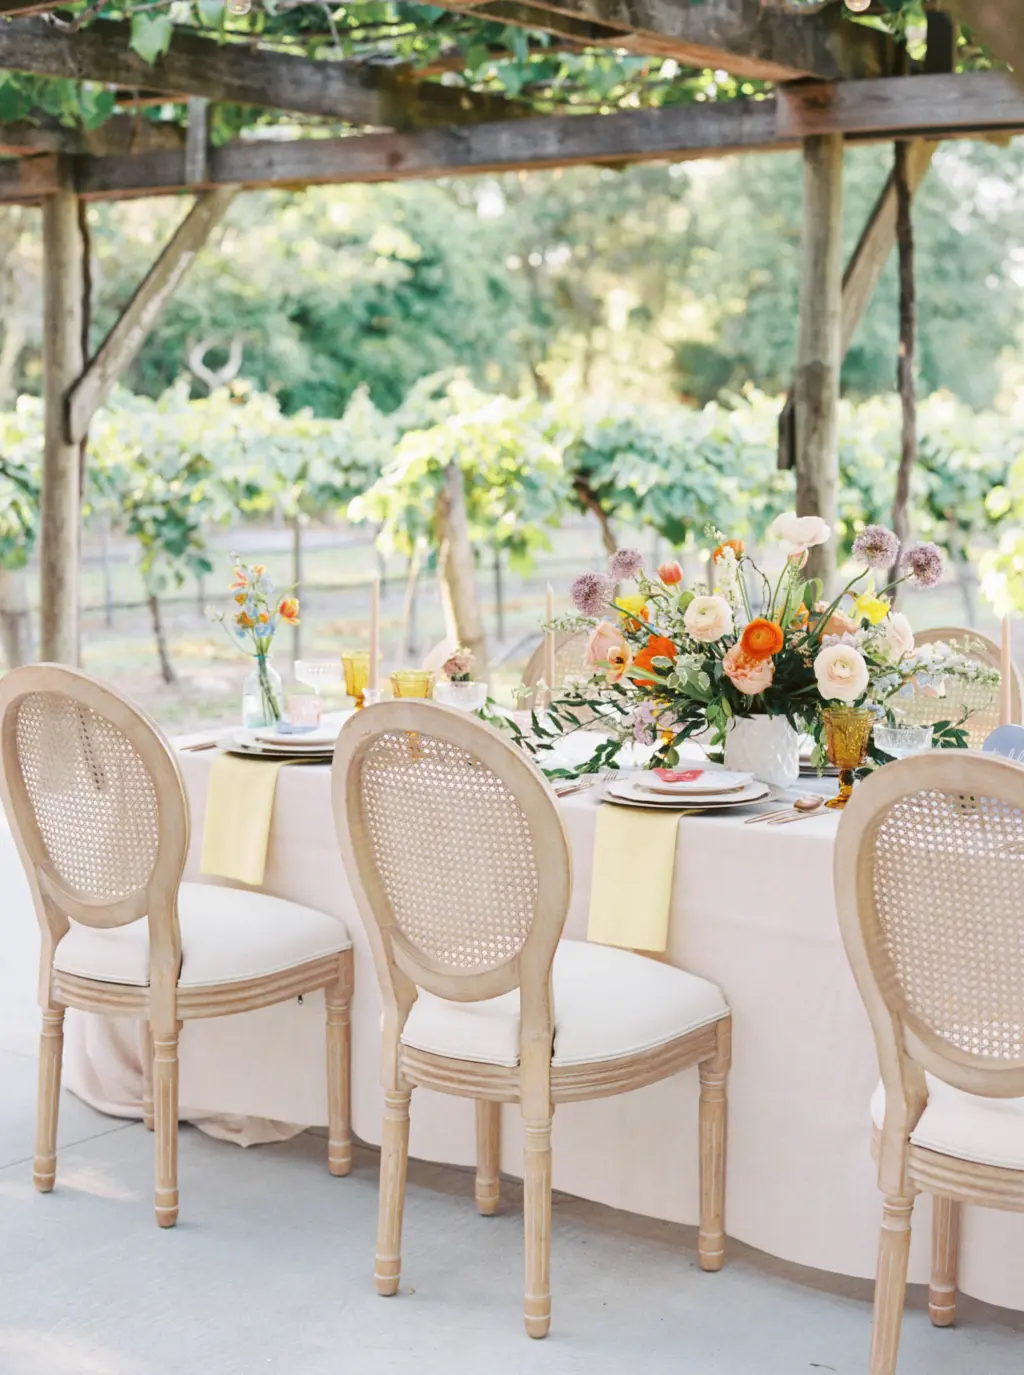 White Oak Cane Rattan Spring Wedding Reception Chair Inspiration with Long Feasting Table and Pastel Linen | Fiorella Winery | Colorful Whimsical Wedding Centerpiece Inspiration | Tampa Bay St. Petersburg Florist Save The Date Florida